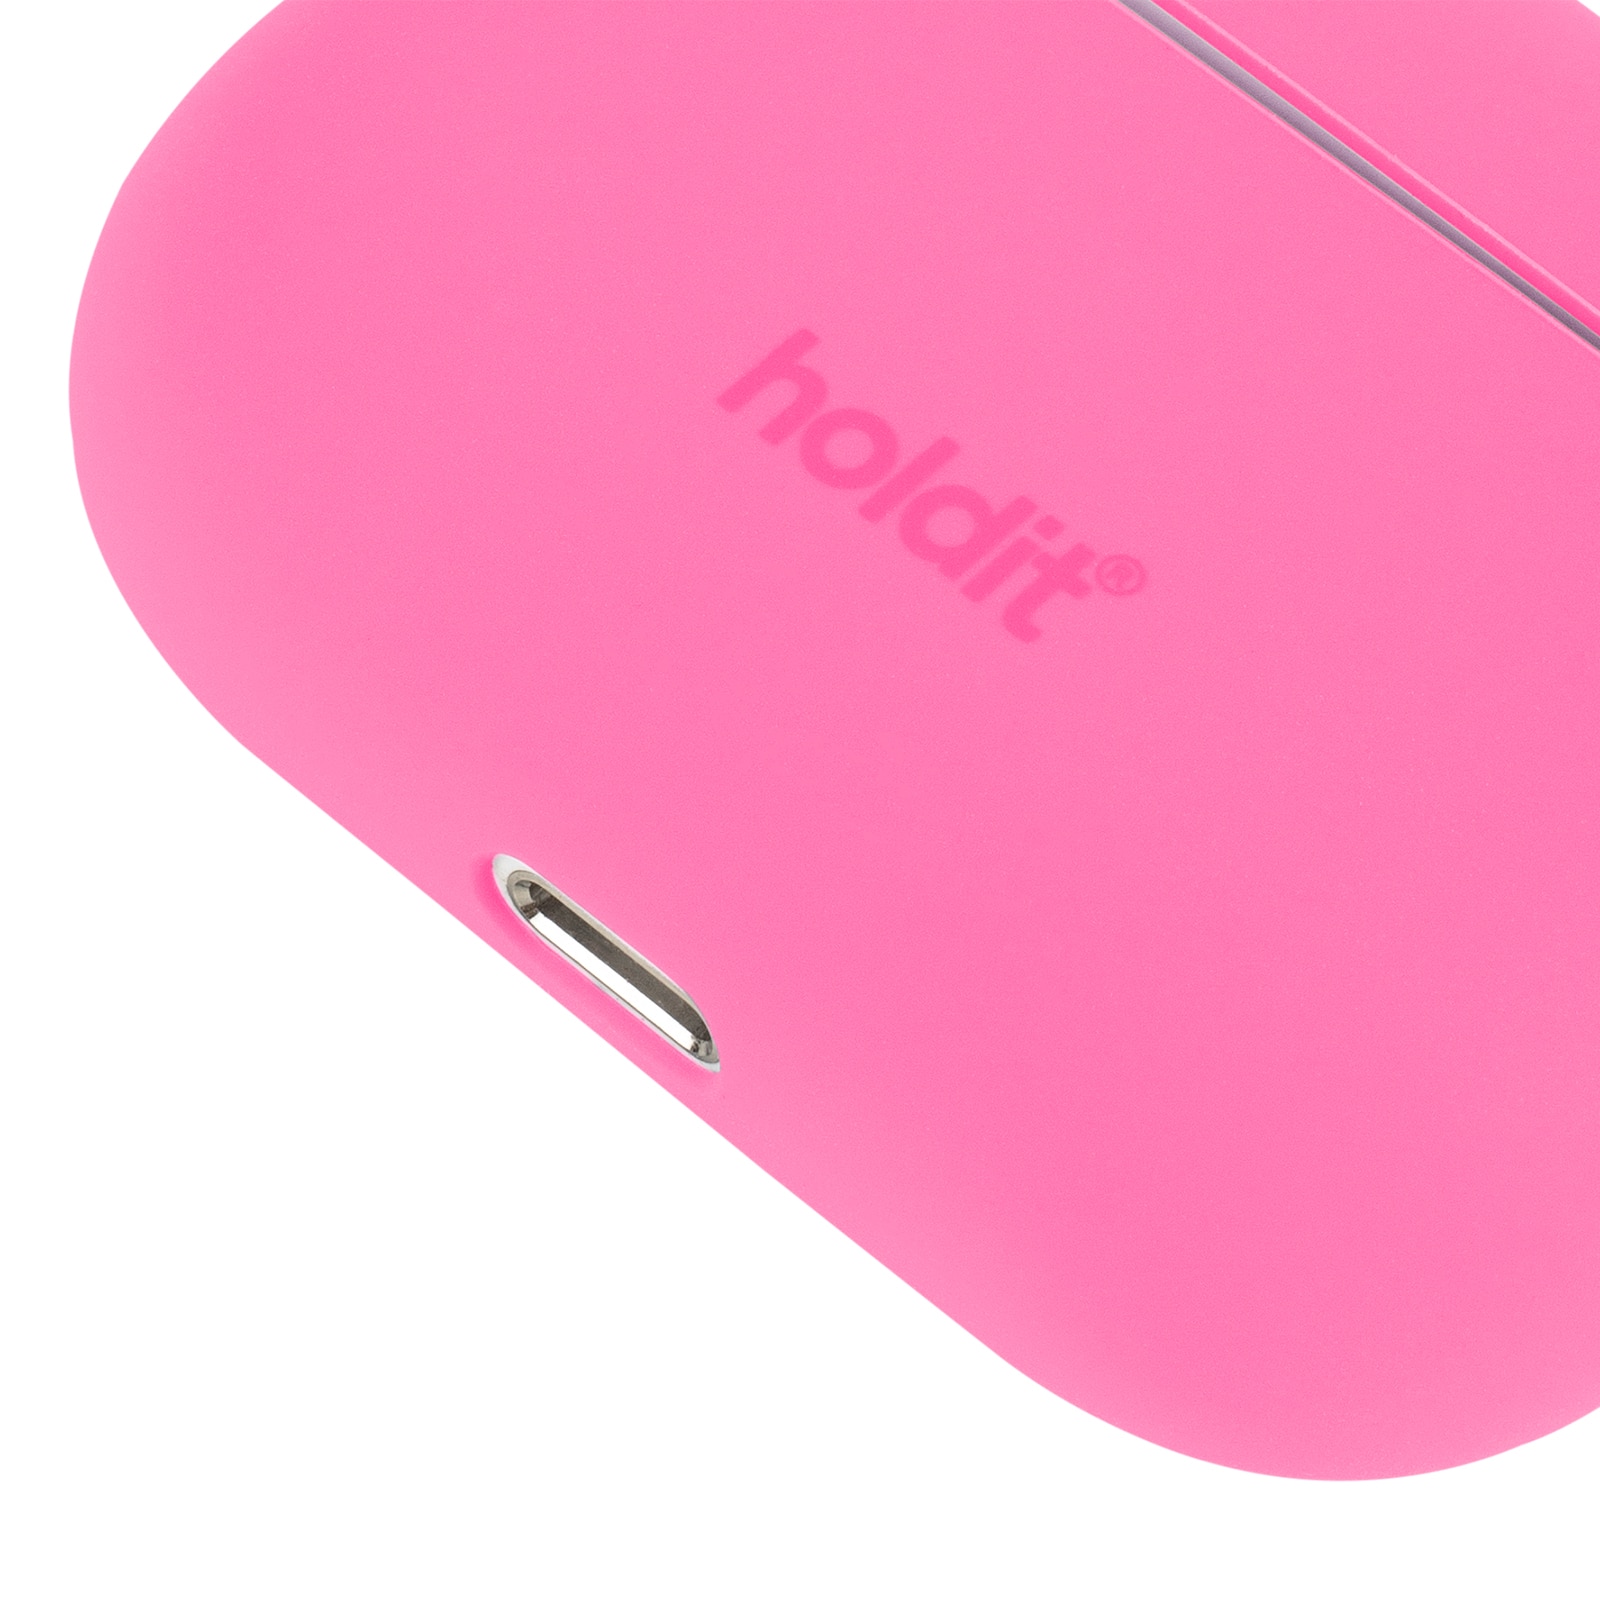 AirPods Pro Silicone Case Bright Pink